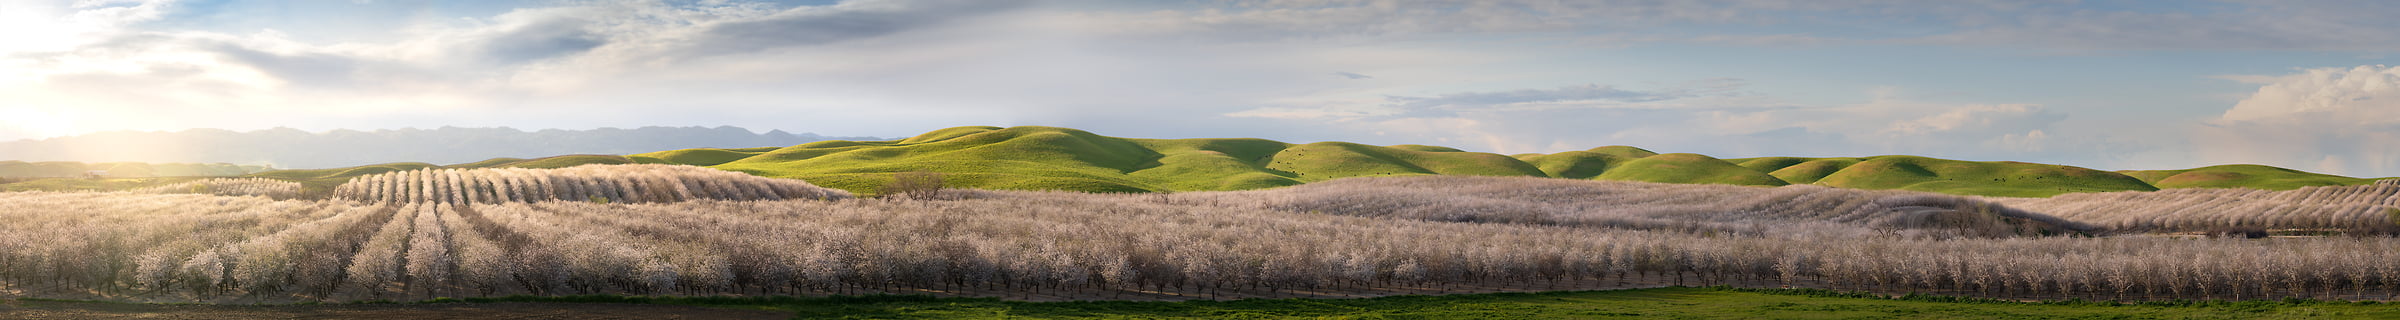 639 megapixels! A very high resolution, large-format VAST panorama photo of the Central Valley; landscape photograph created by Jeff Lewis in Central Valley, California